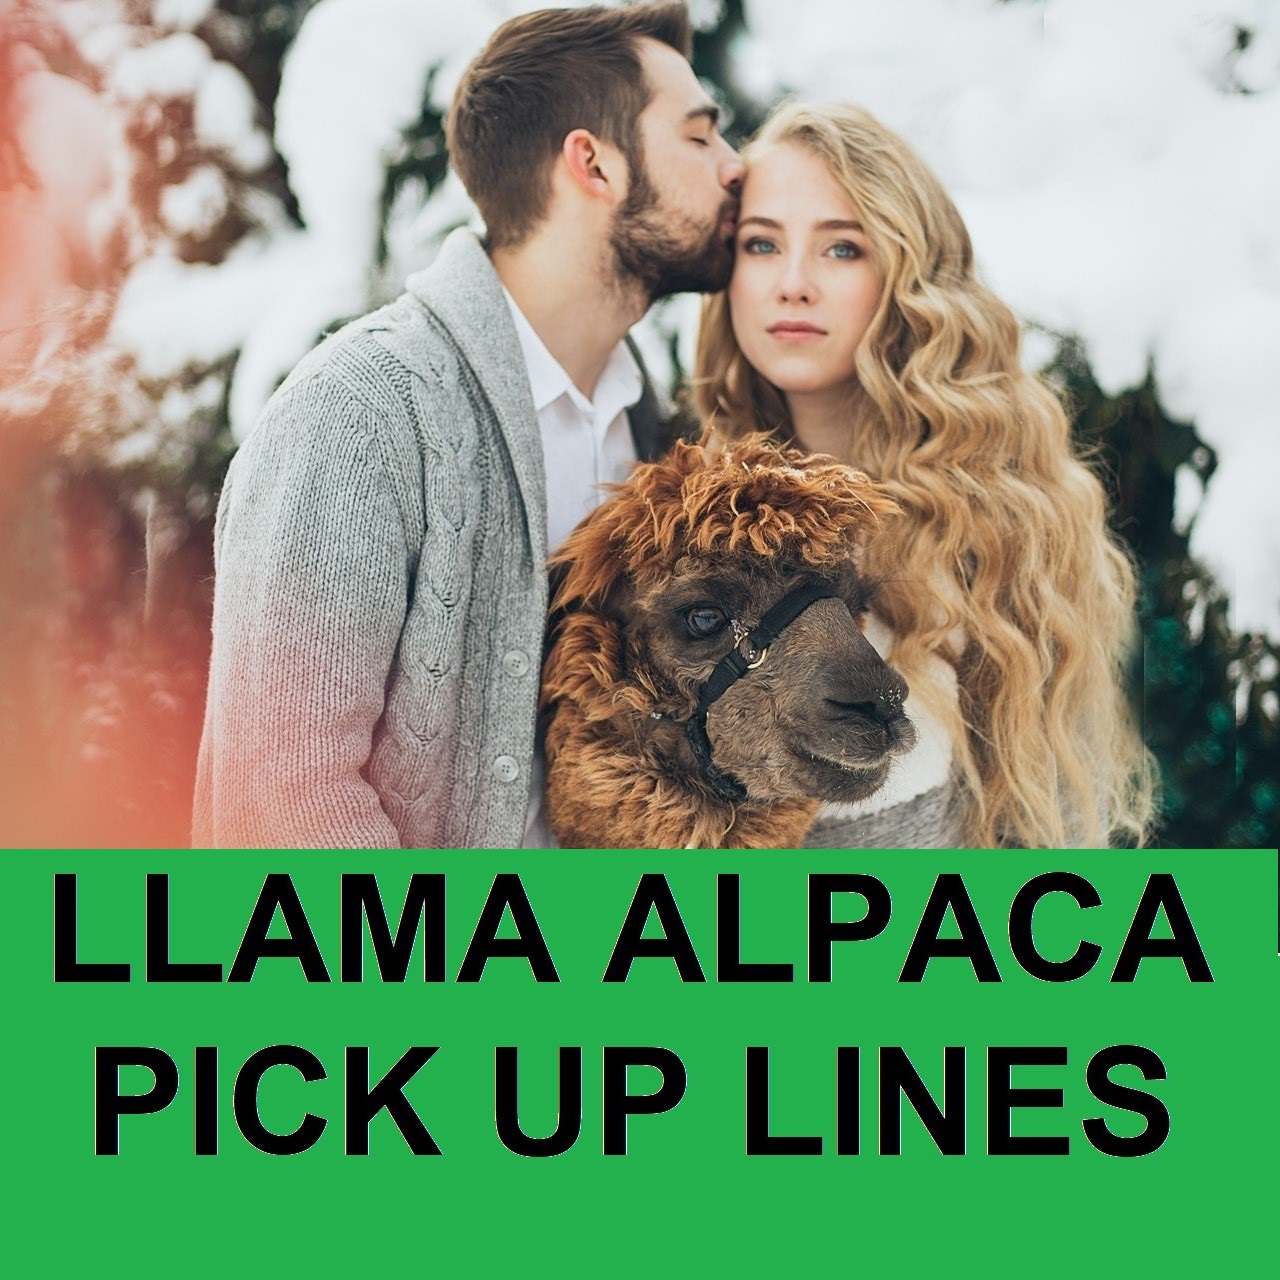 [Top 80+] Llama Alpaca Pick Up Lines,Puns,Jokes To Use On Hilly People!